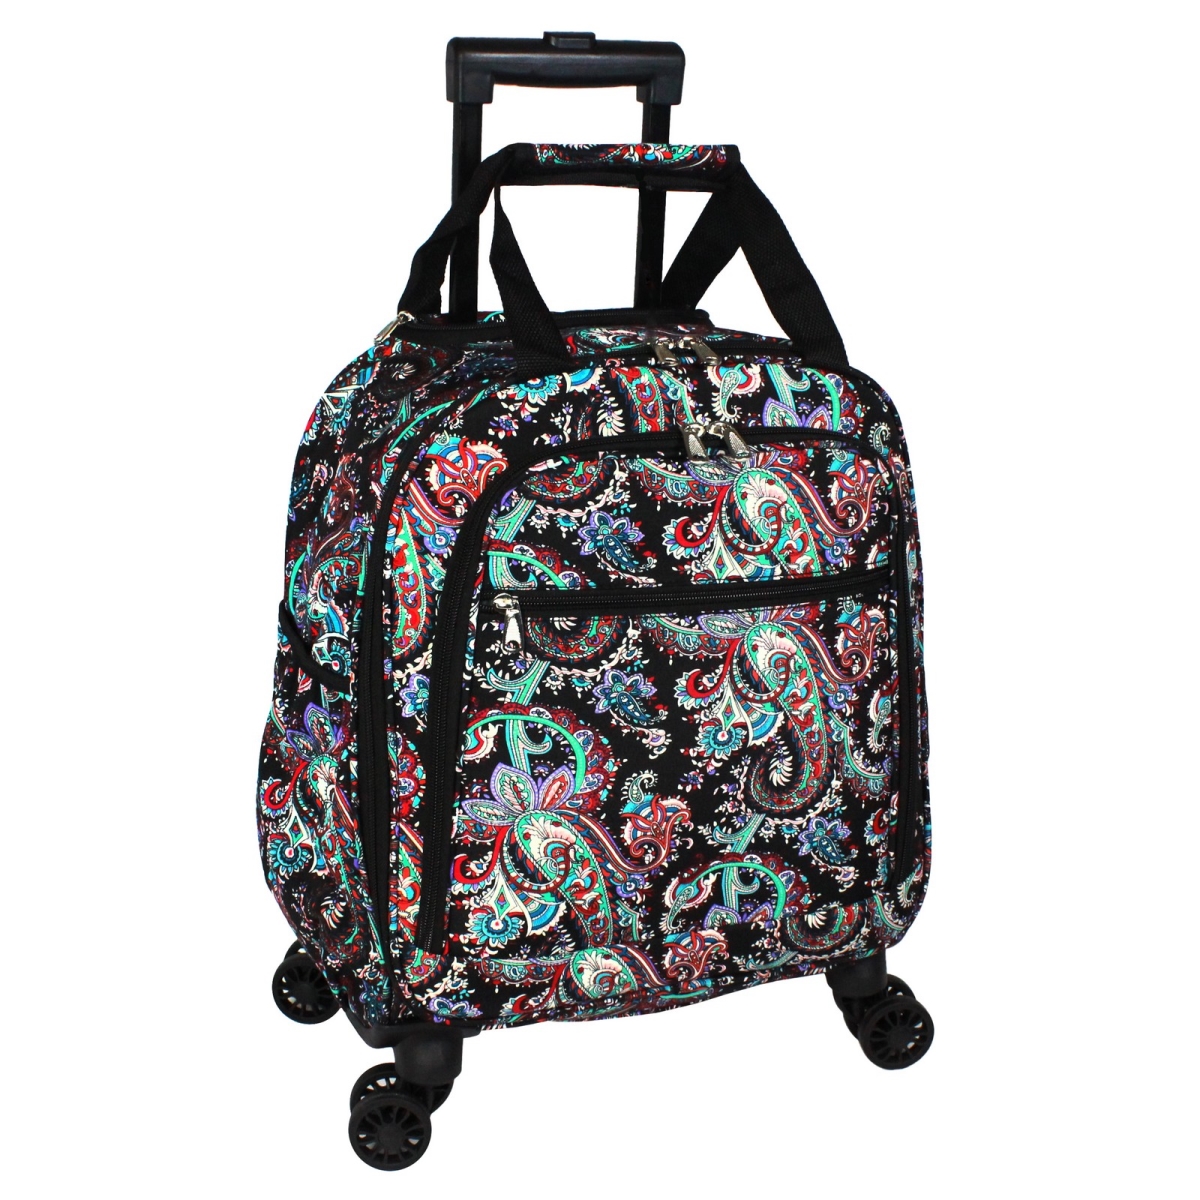 815501-207 18 In. Prints Spinner Carry-on Luggage, Paisley